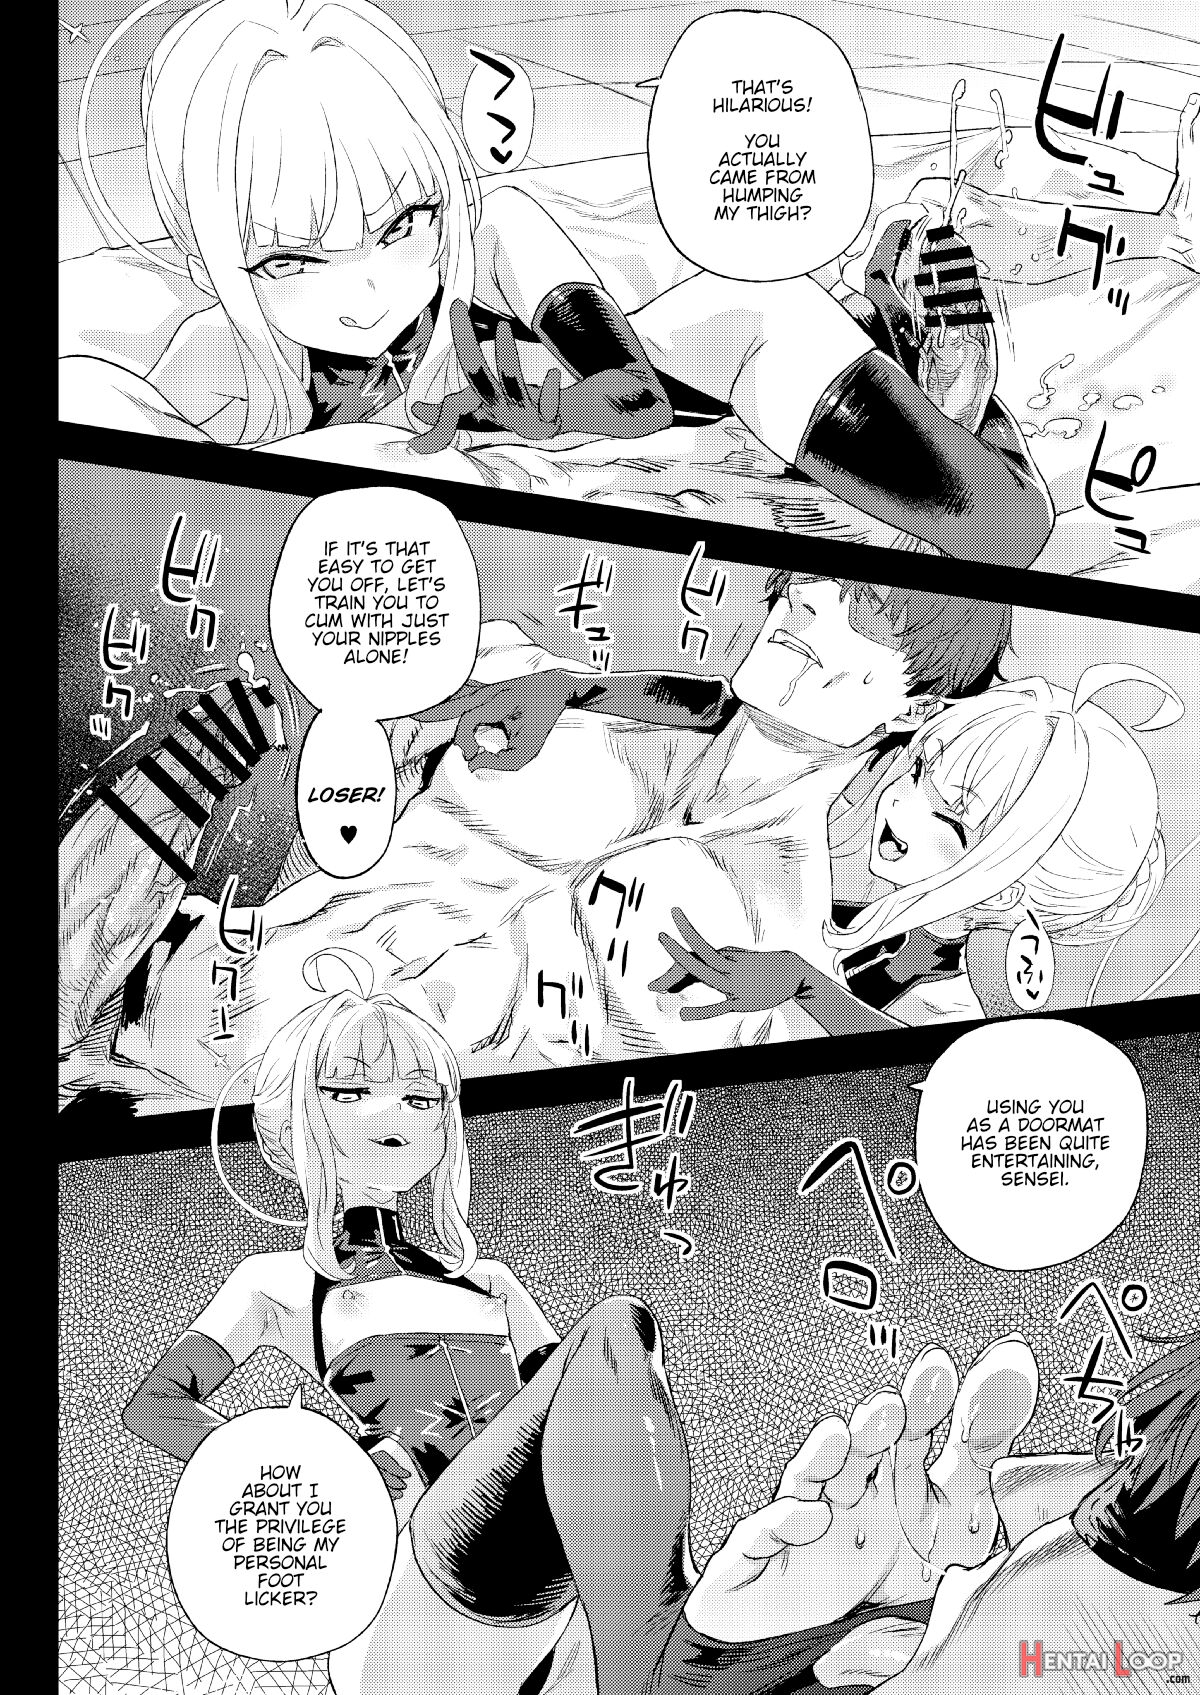 Choujin Versus - Preview page 6